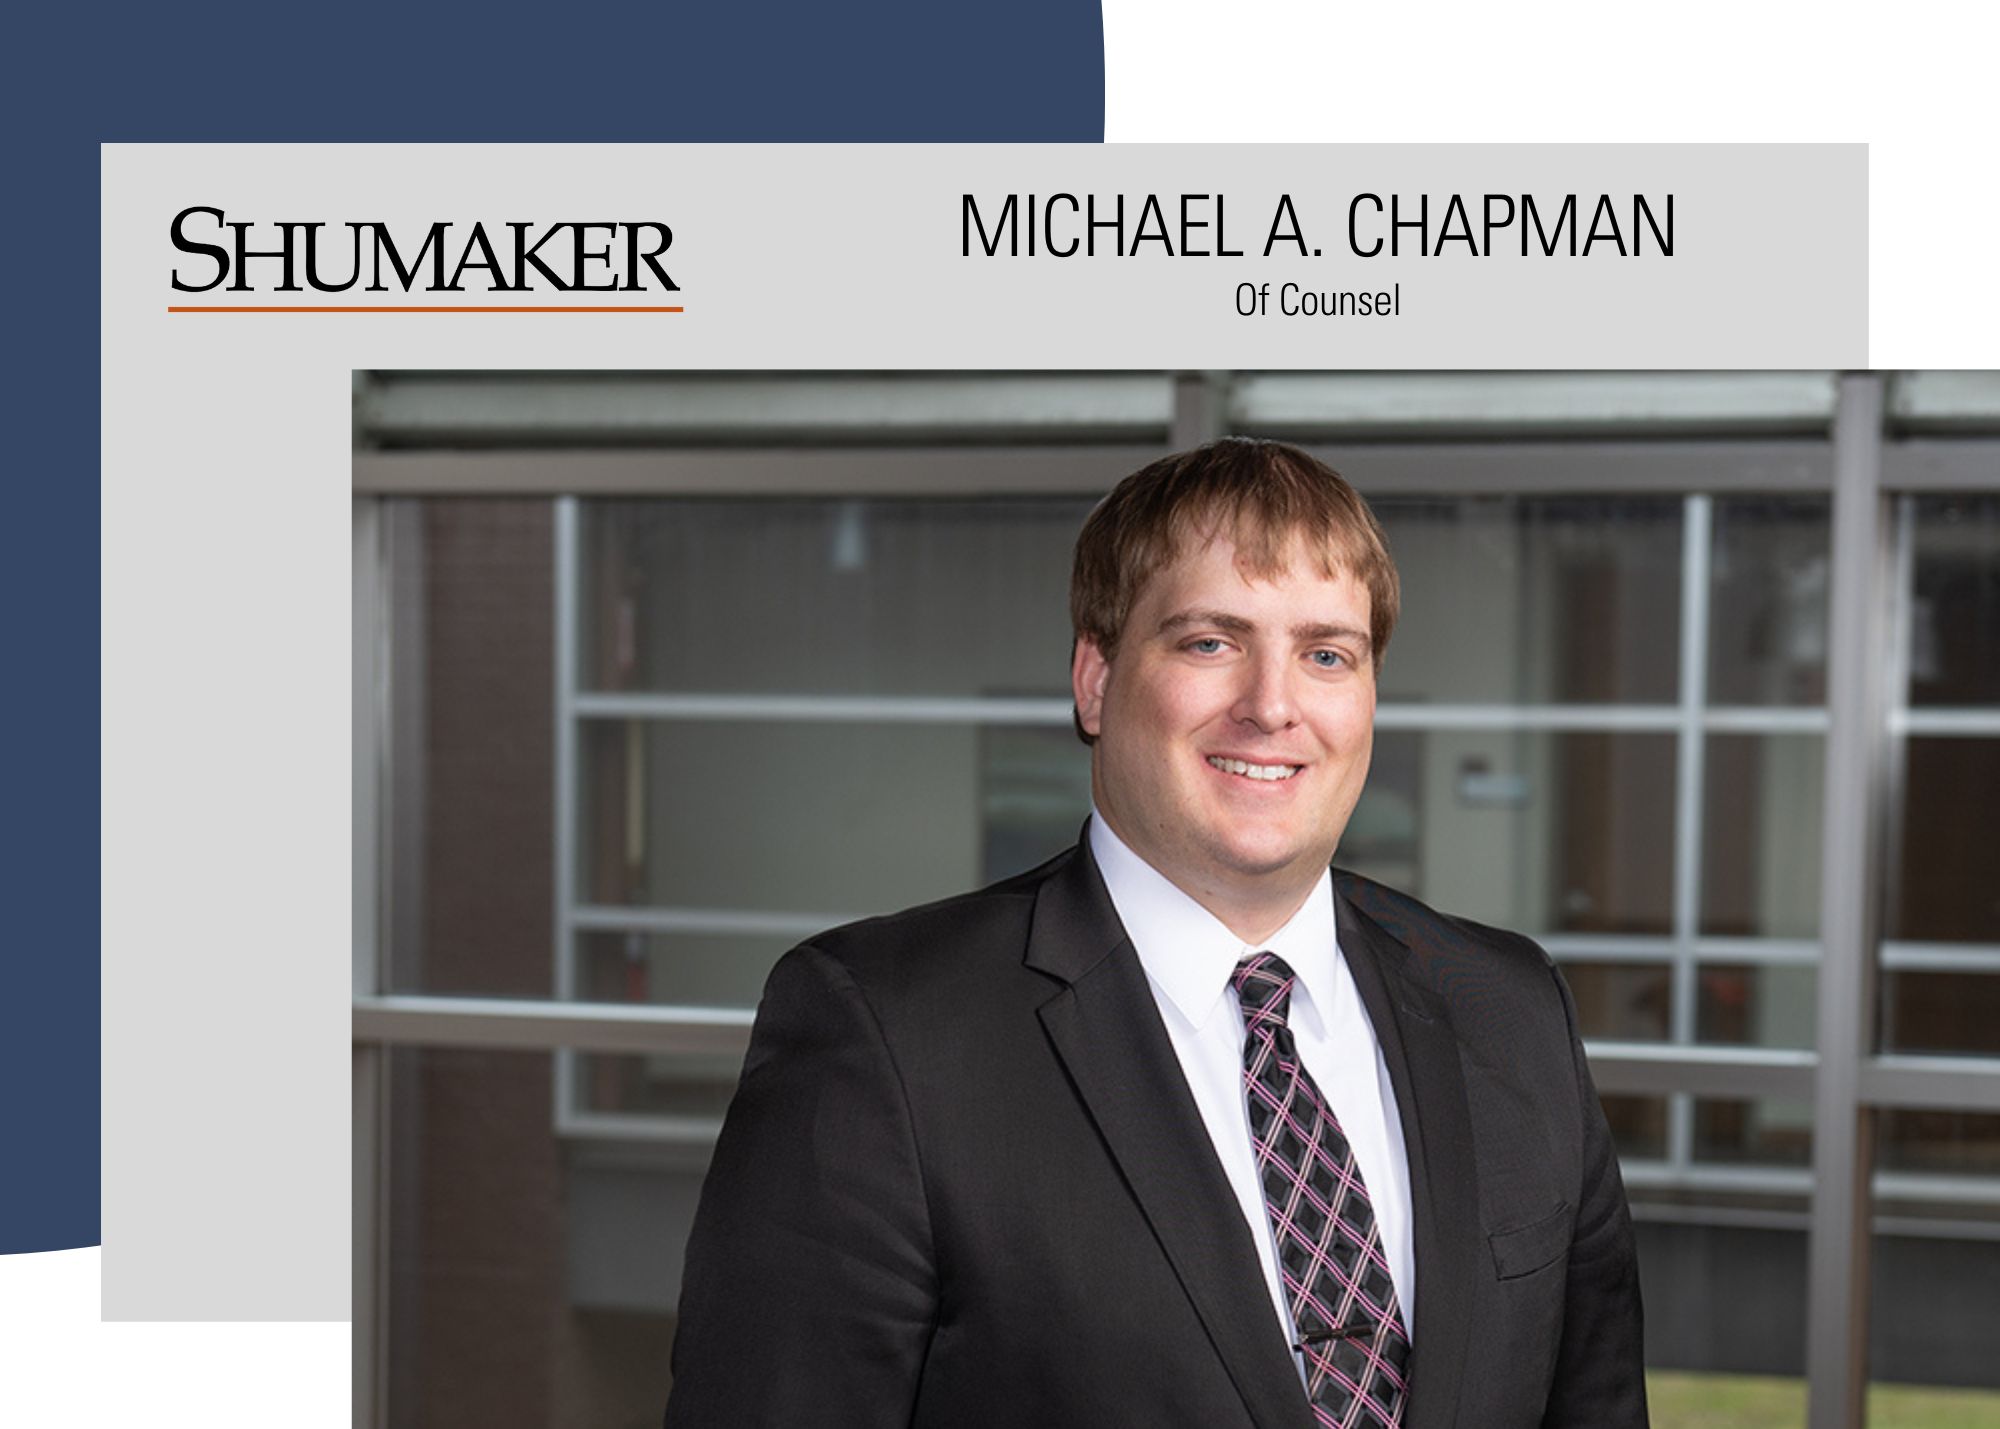 Lawyer Michael A. Chapman Joins Shumaker’s Corporate, Tax and Transaction Service Line, Adding to Growing Sports Law Team